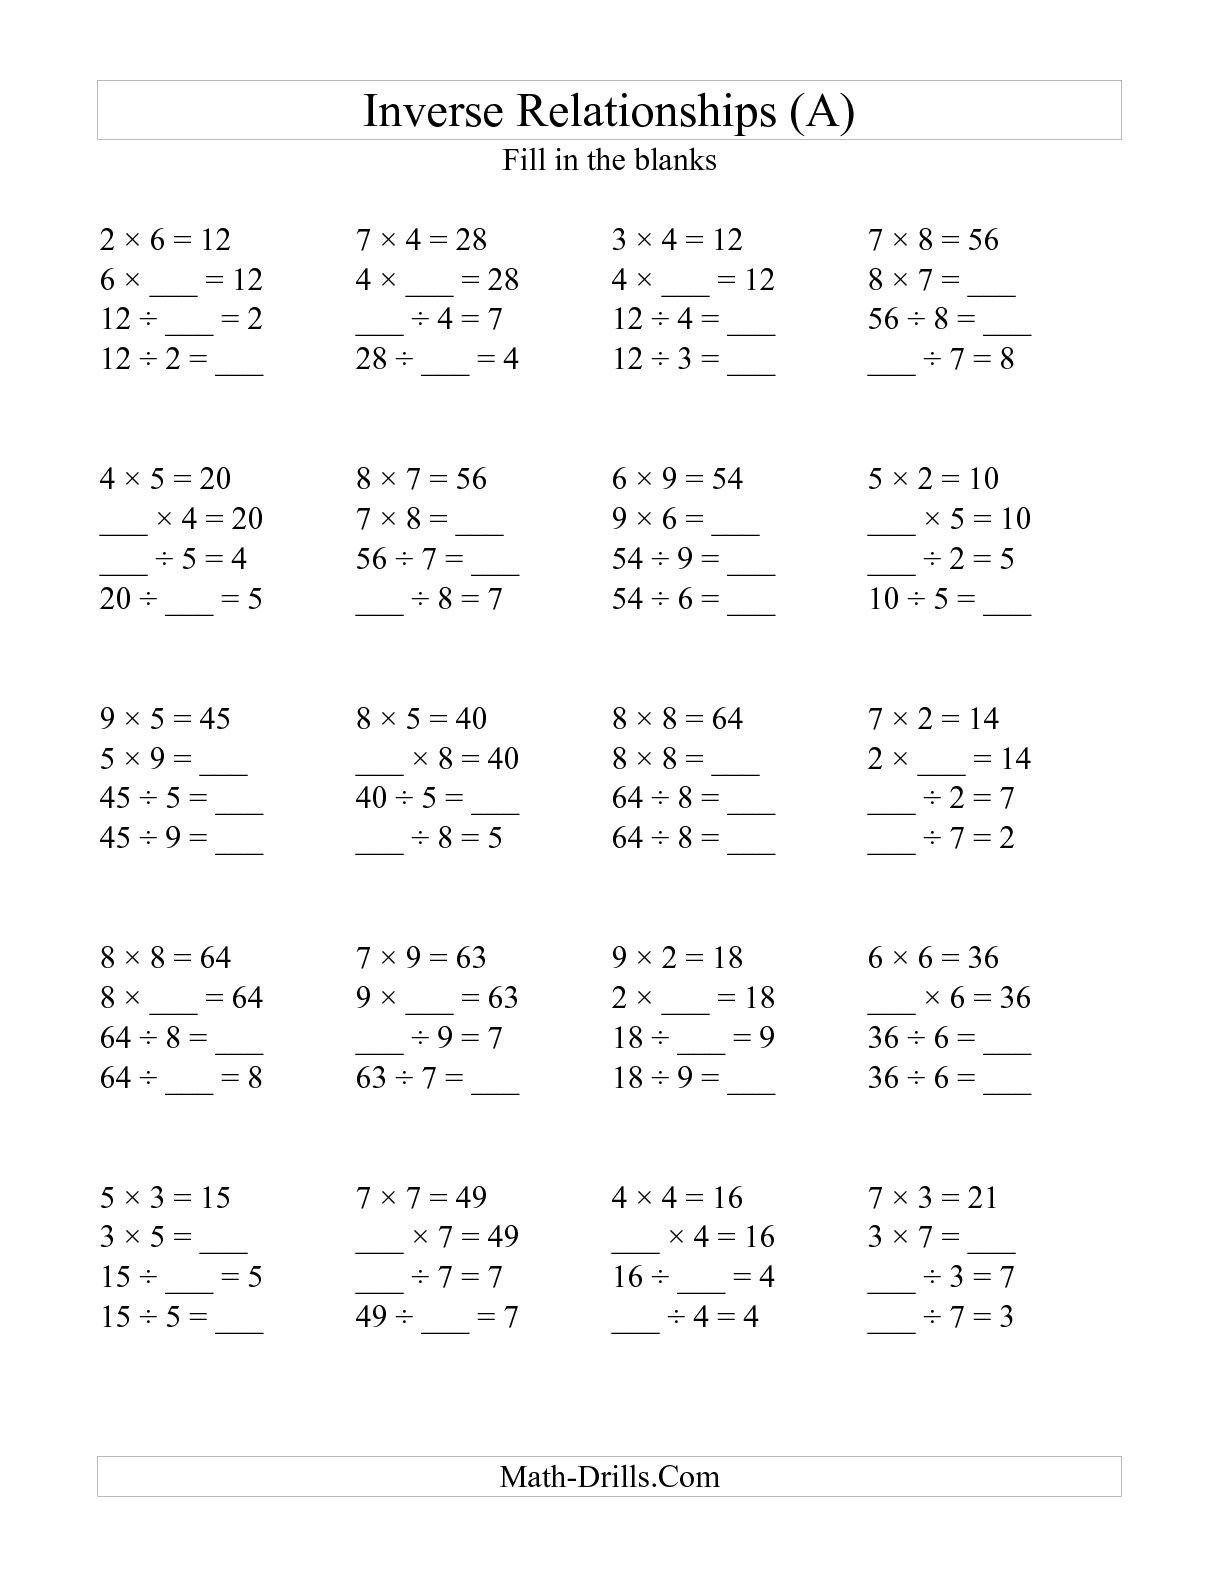 addition-and-division-of-one-and-two-digit-divisors-worksheets-worksheet-hero